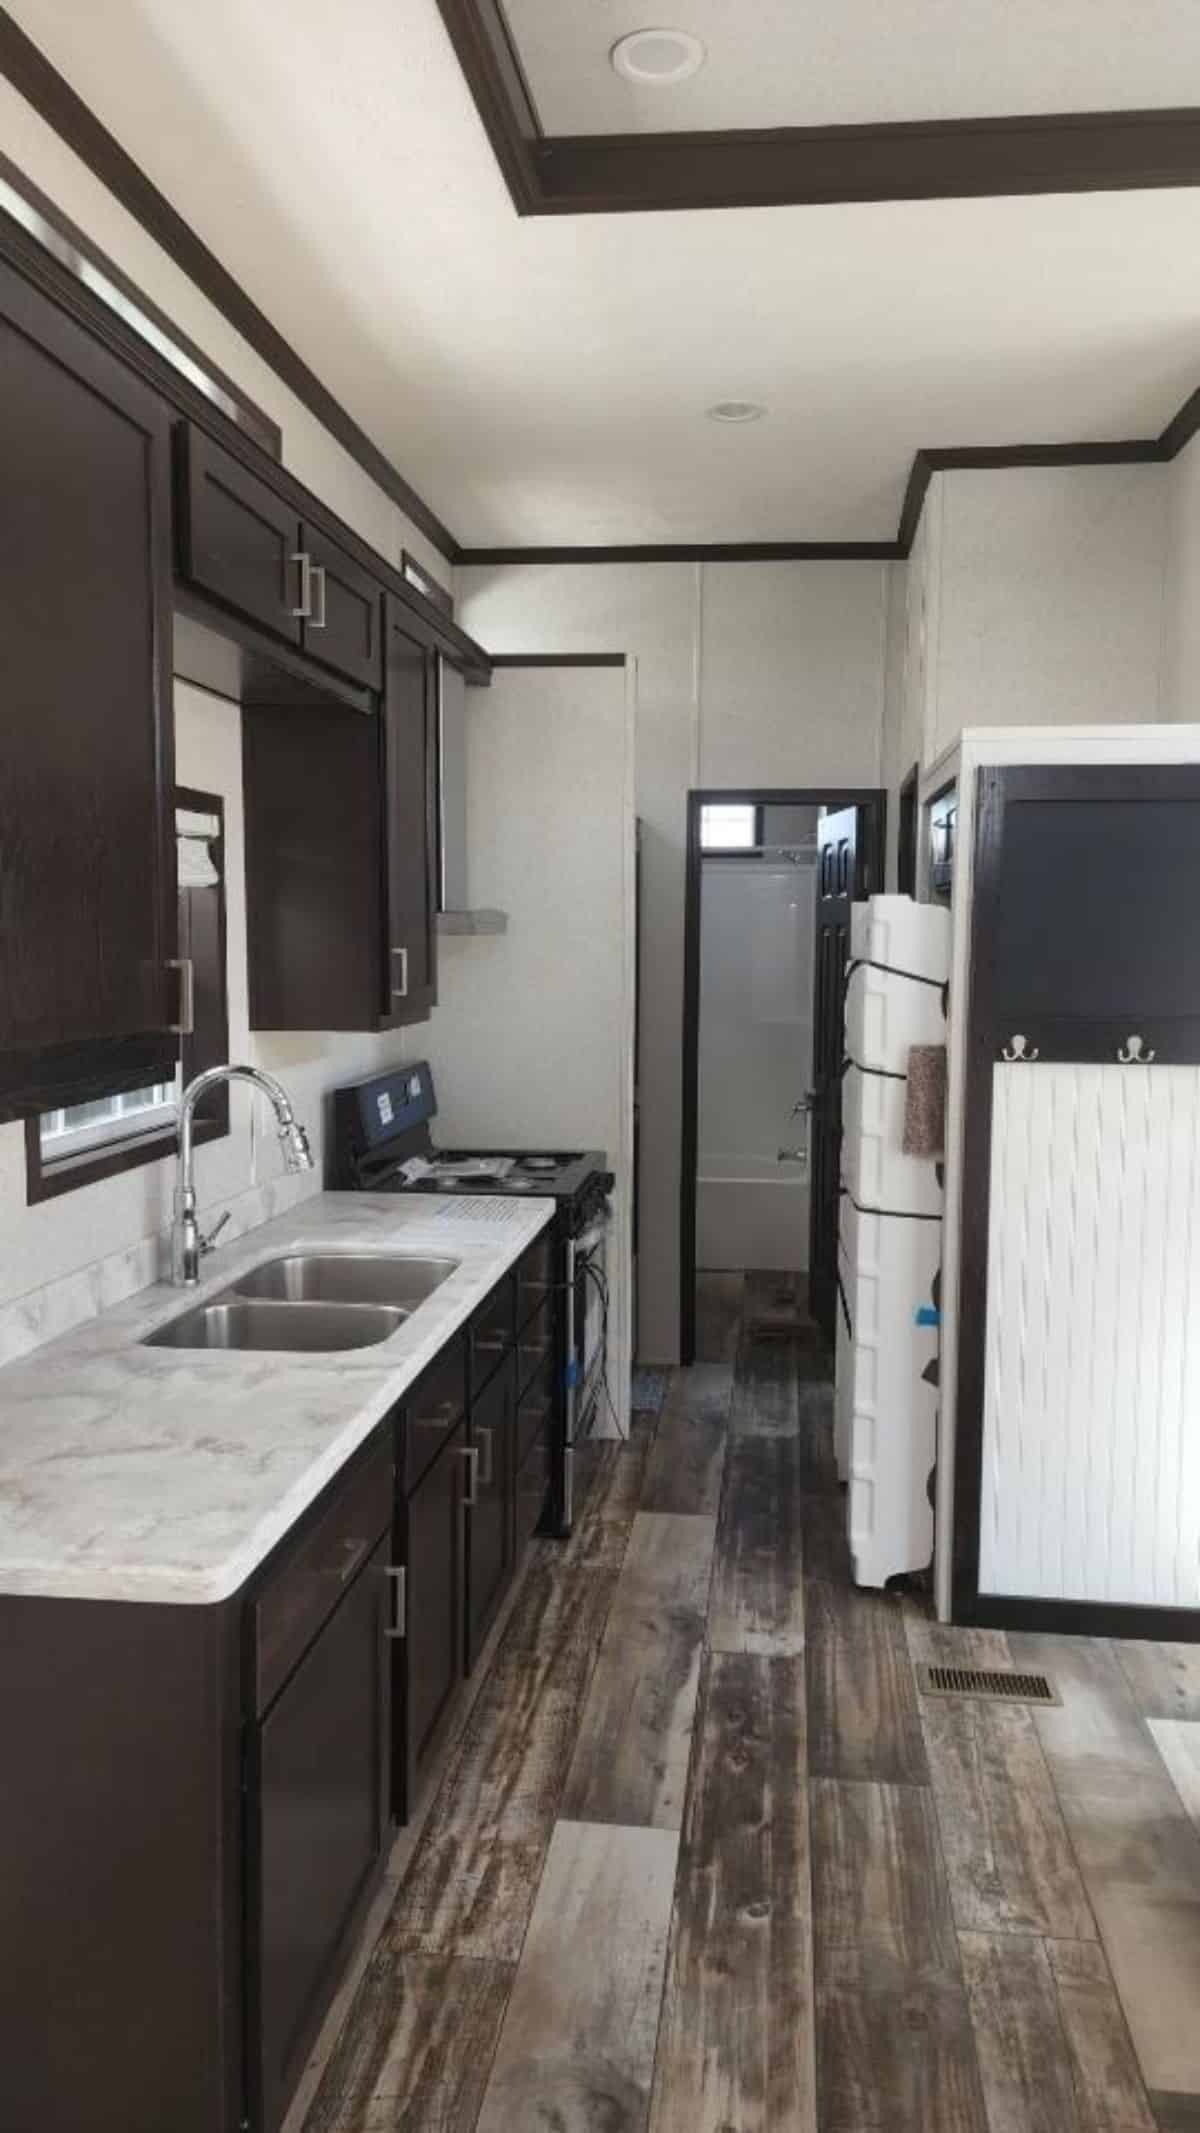 Well organized kitchen area of two bedroom tiny home